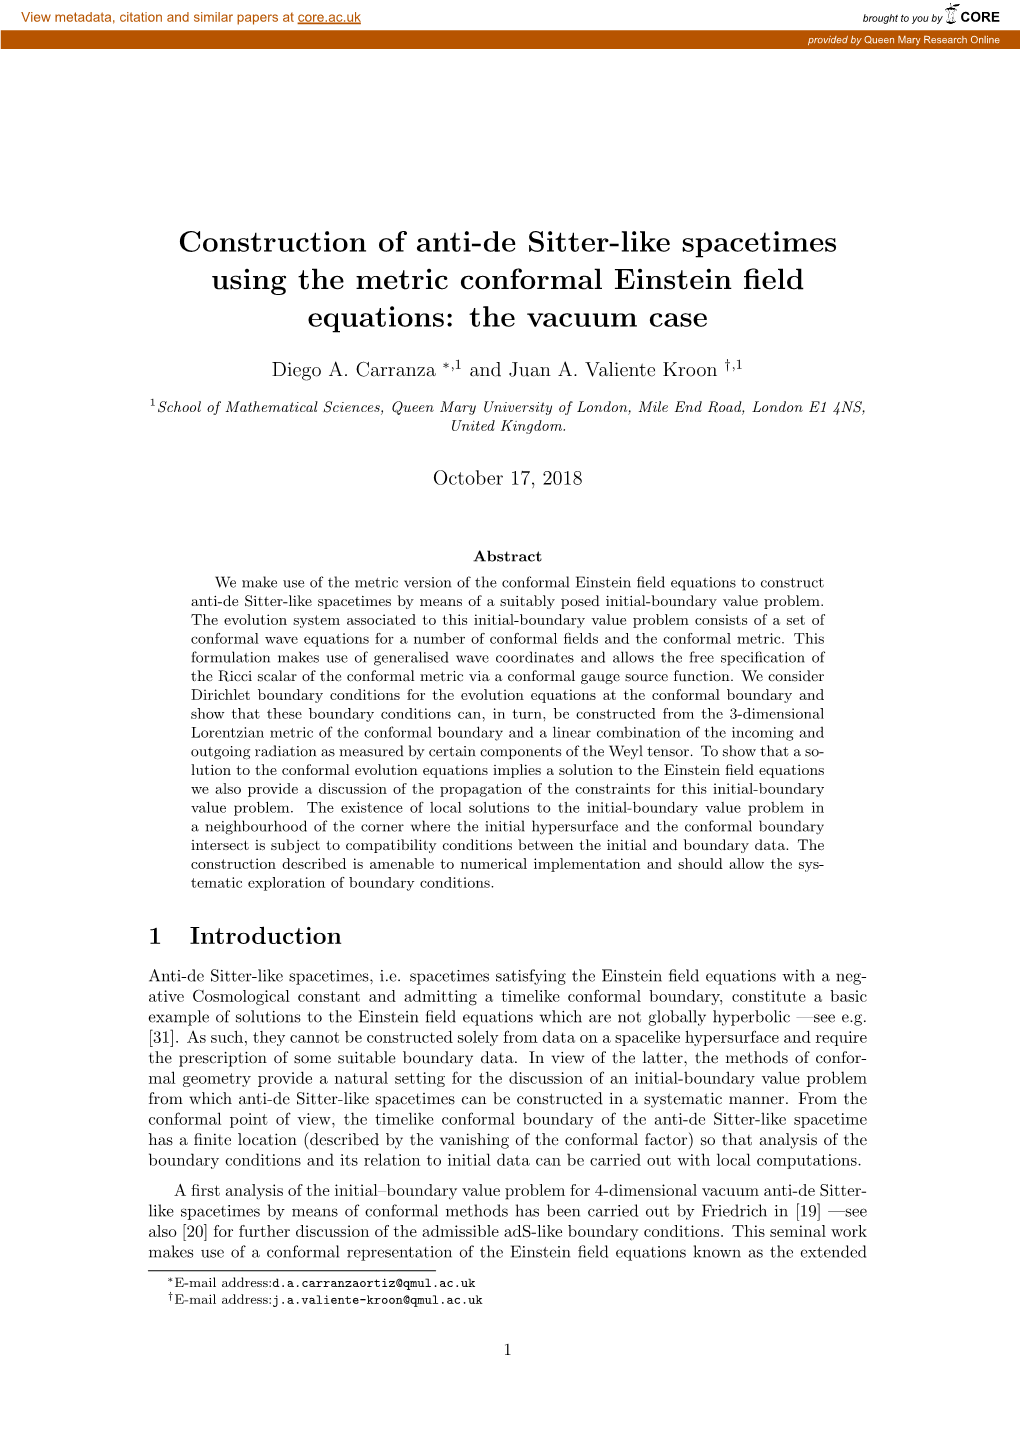 Construction of Anti-De Sitter-Like Spacetimes Using the Metric Conformal Einstein ﬁeld Equations: the Vacuum Case